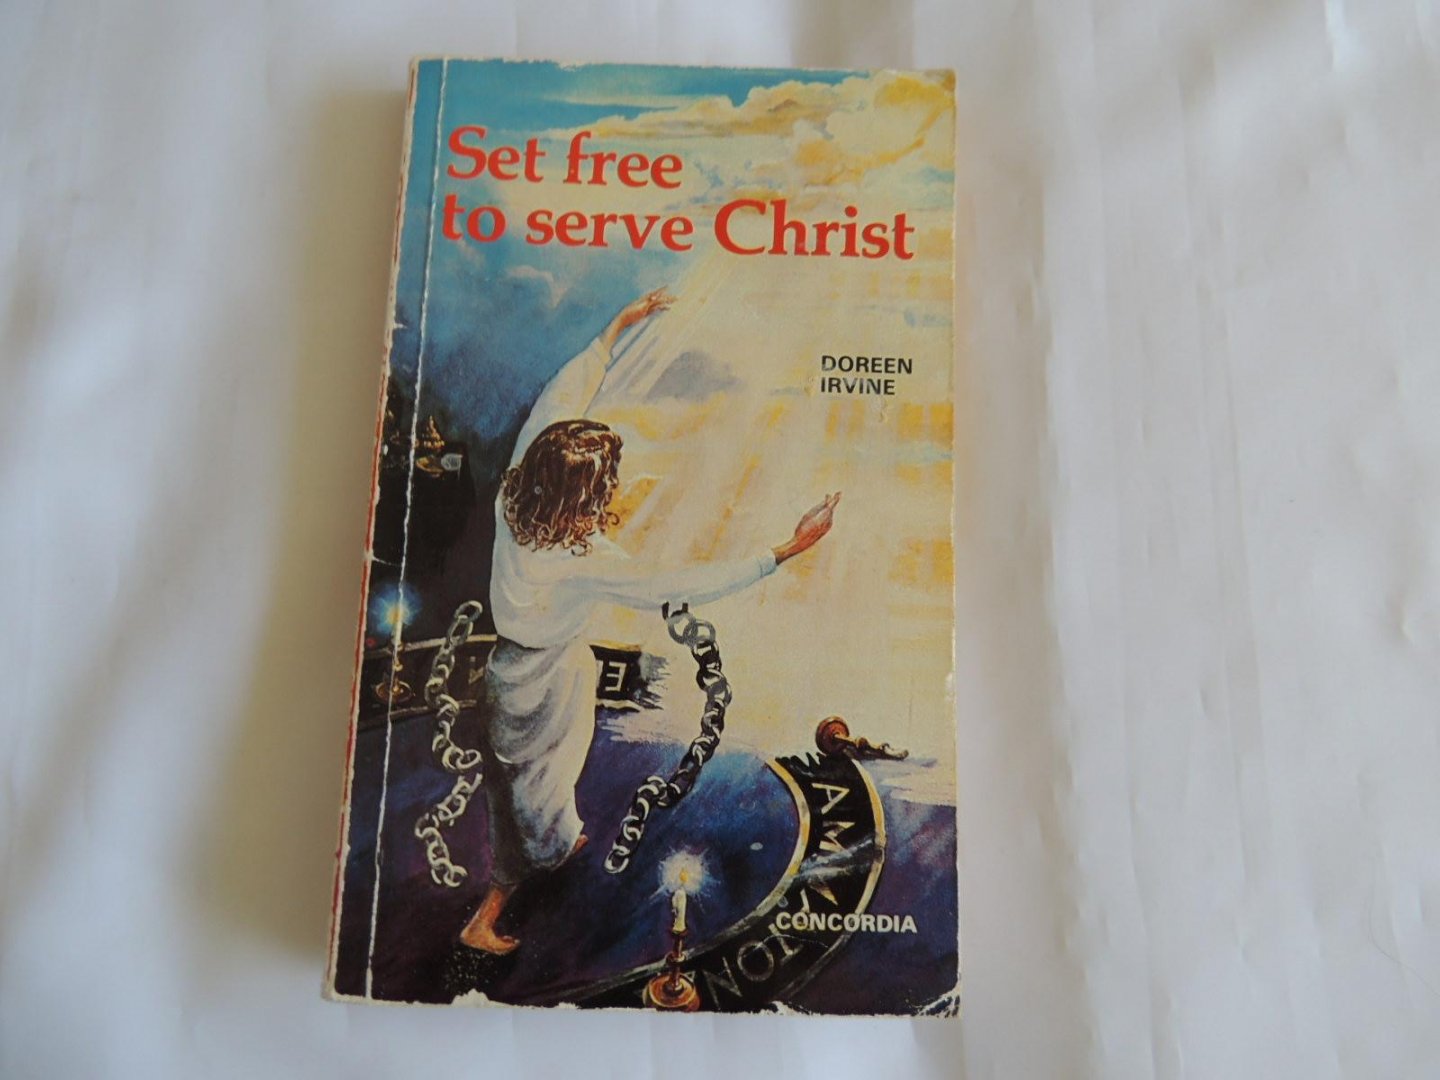 Doreen irvine - Set free to serve Christ - from witchcraft to CHRIST